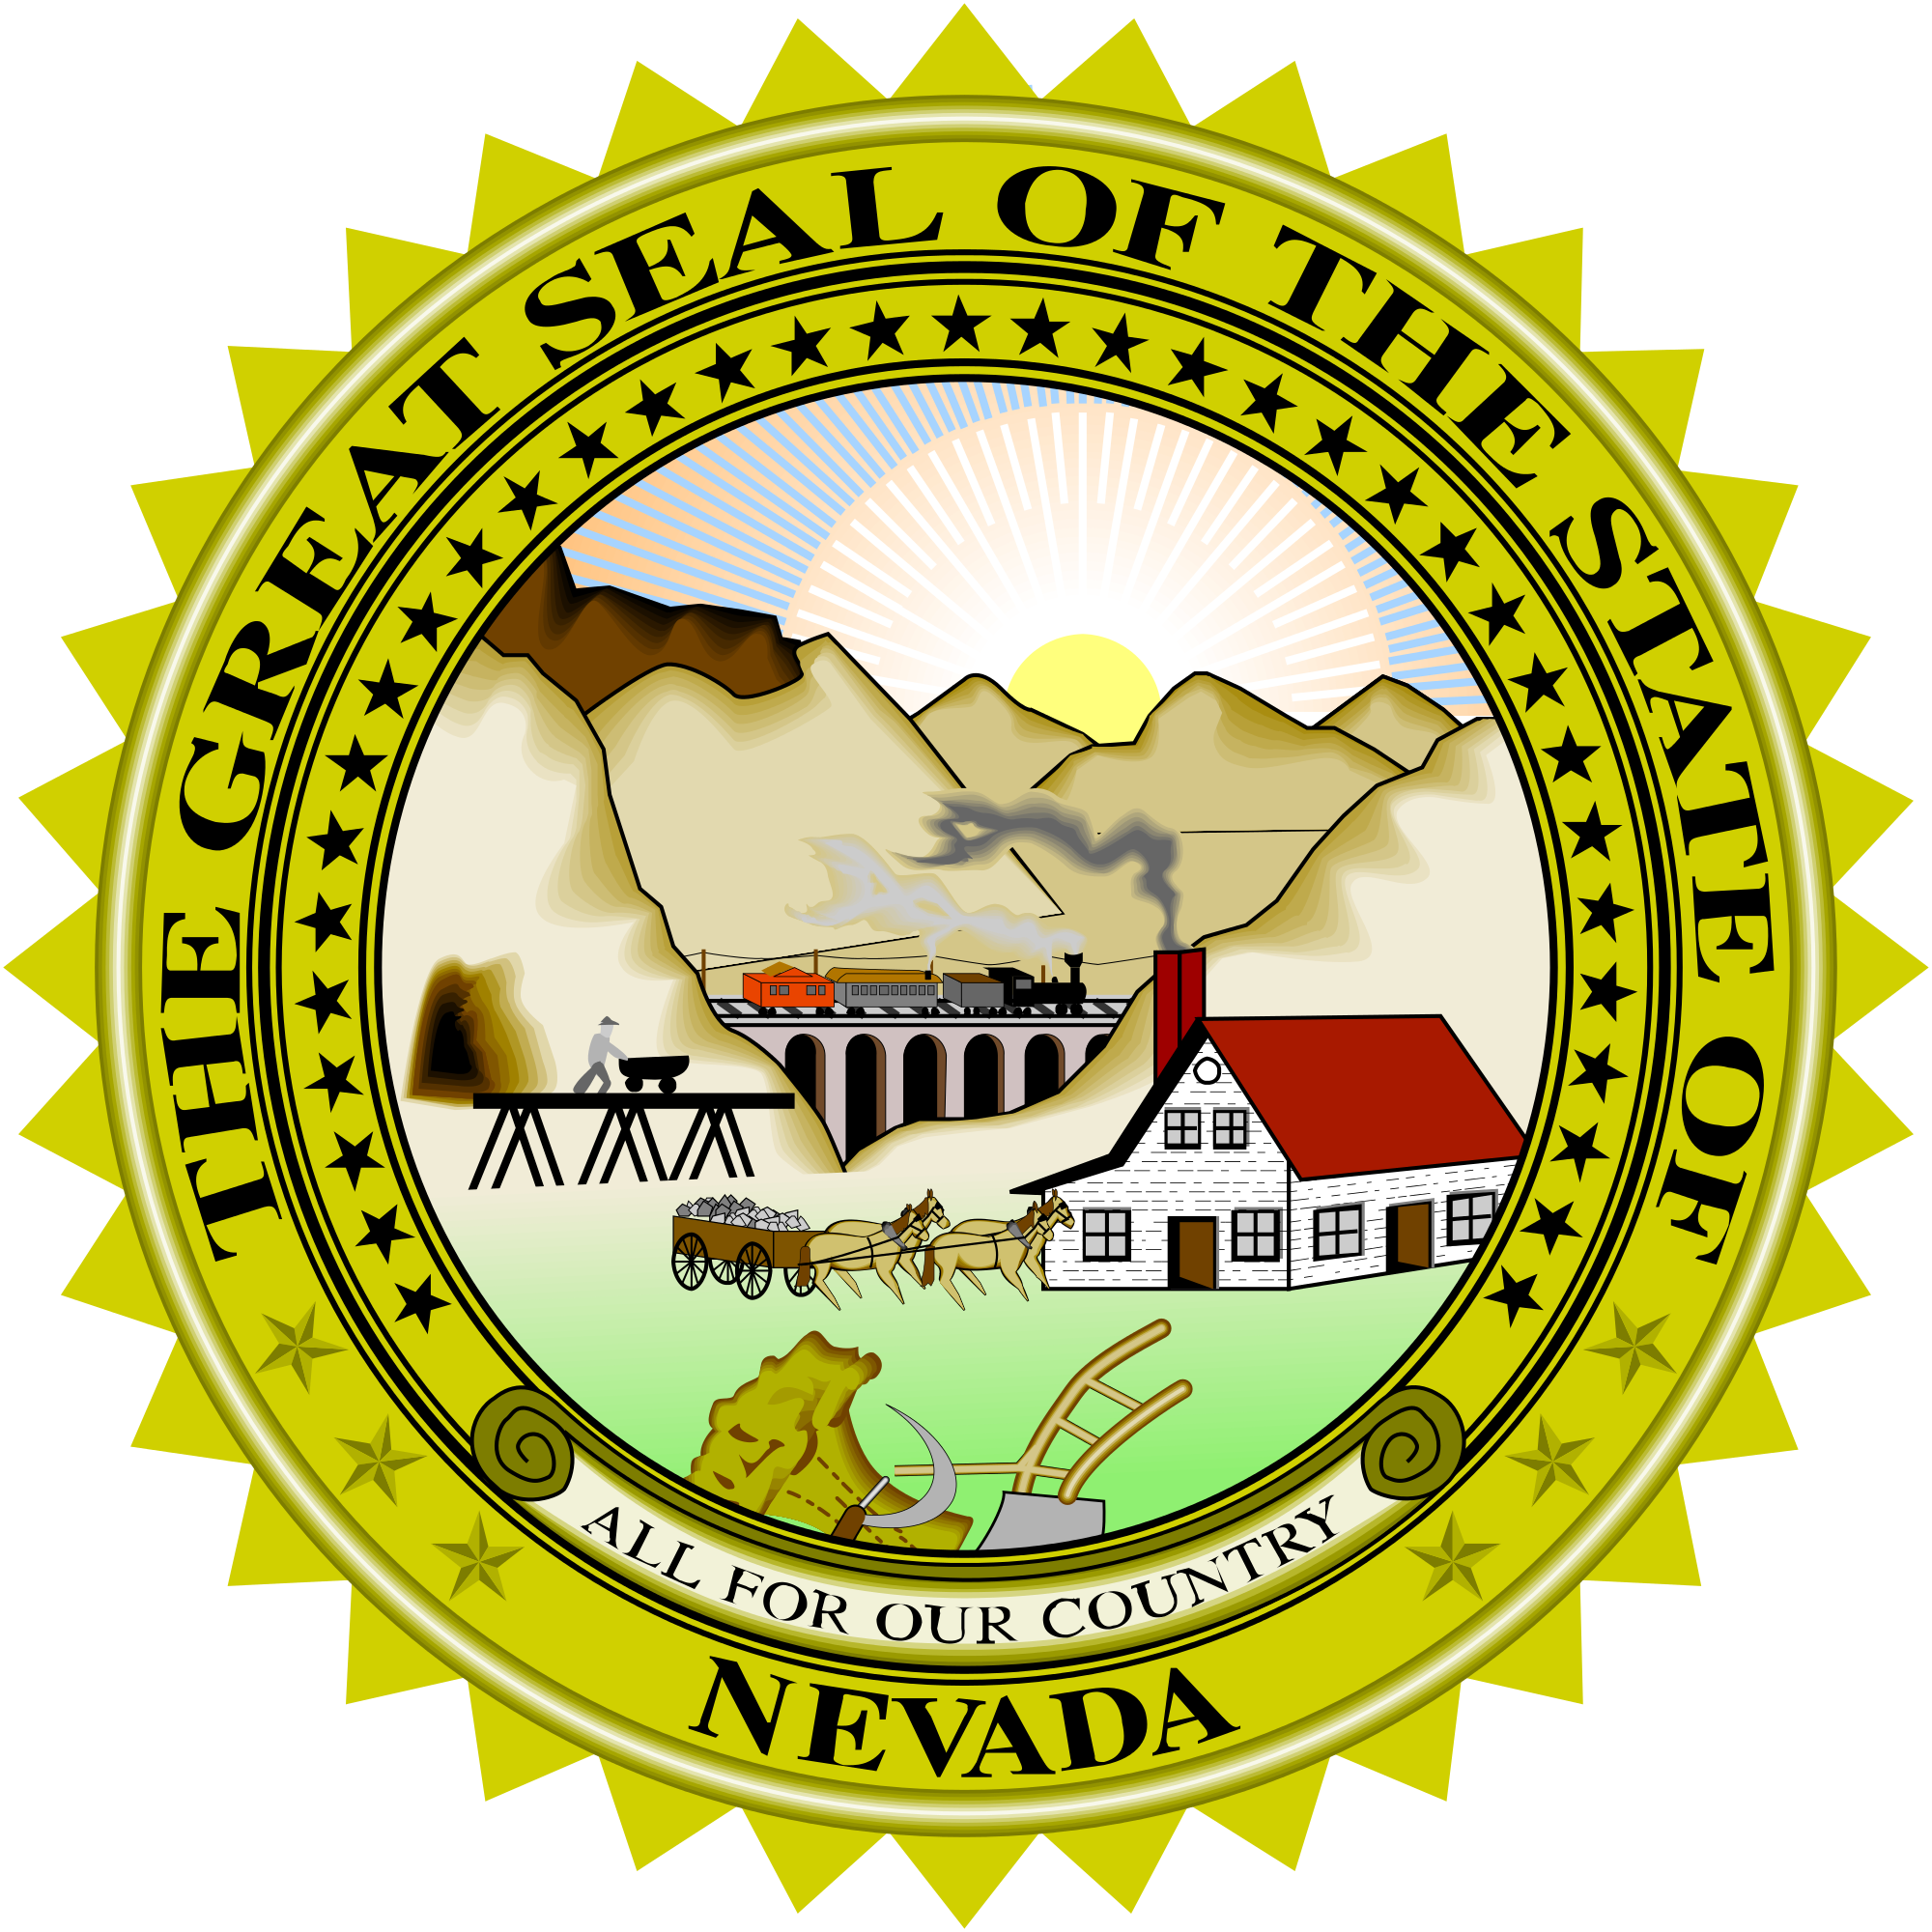 Government Bell And Howell - Nevada State Seal (2200x2200)